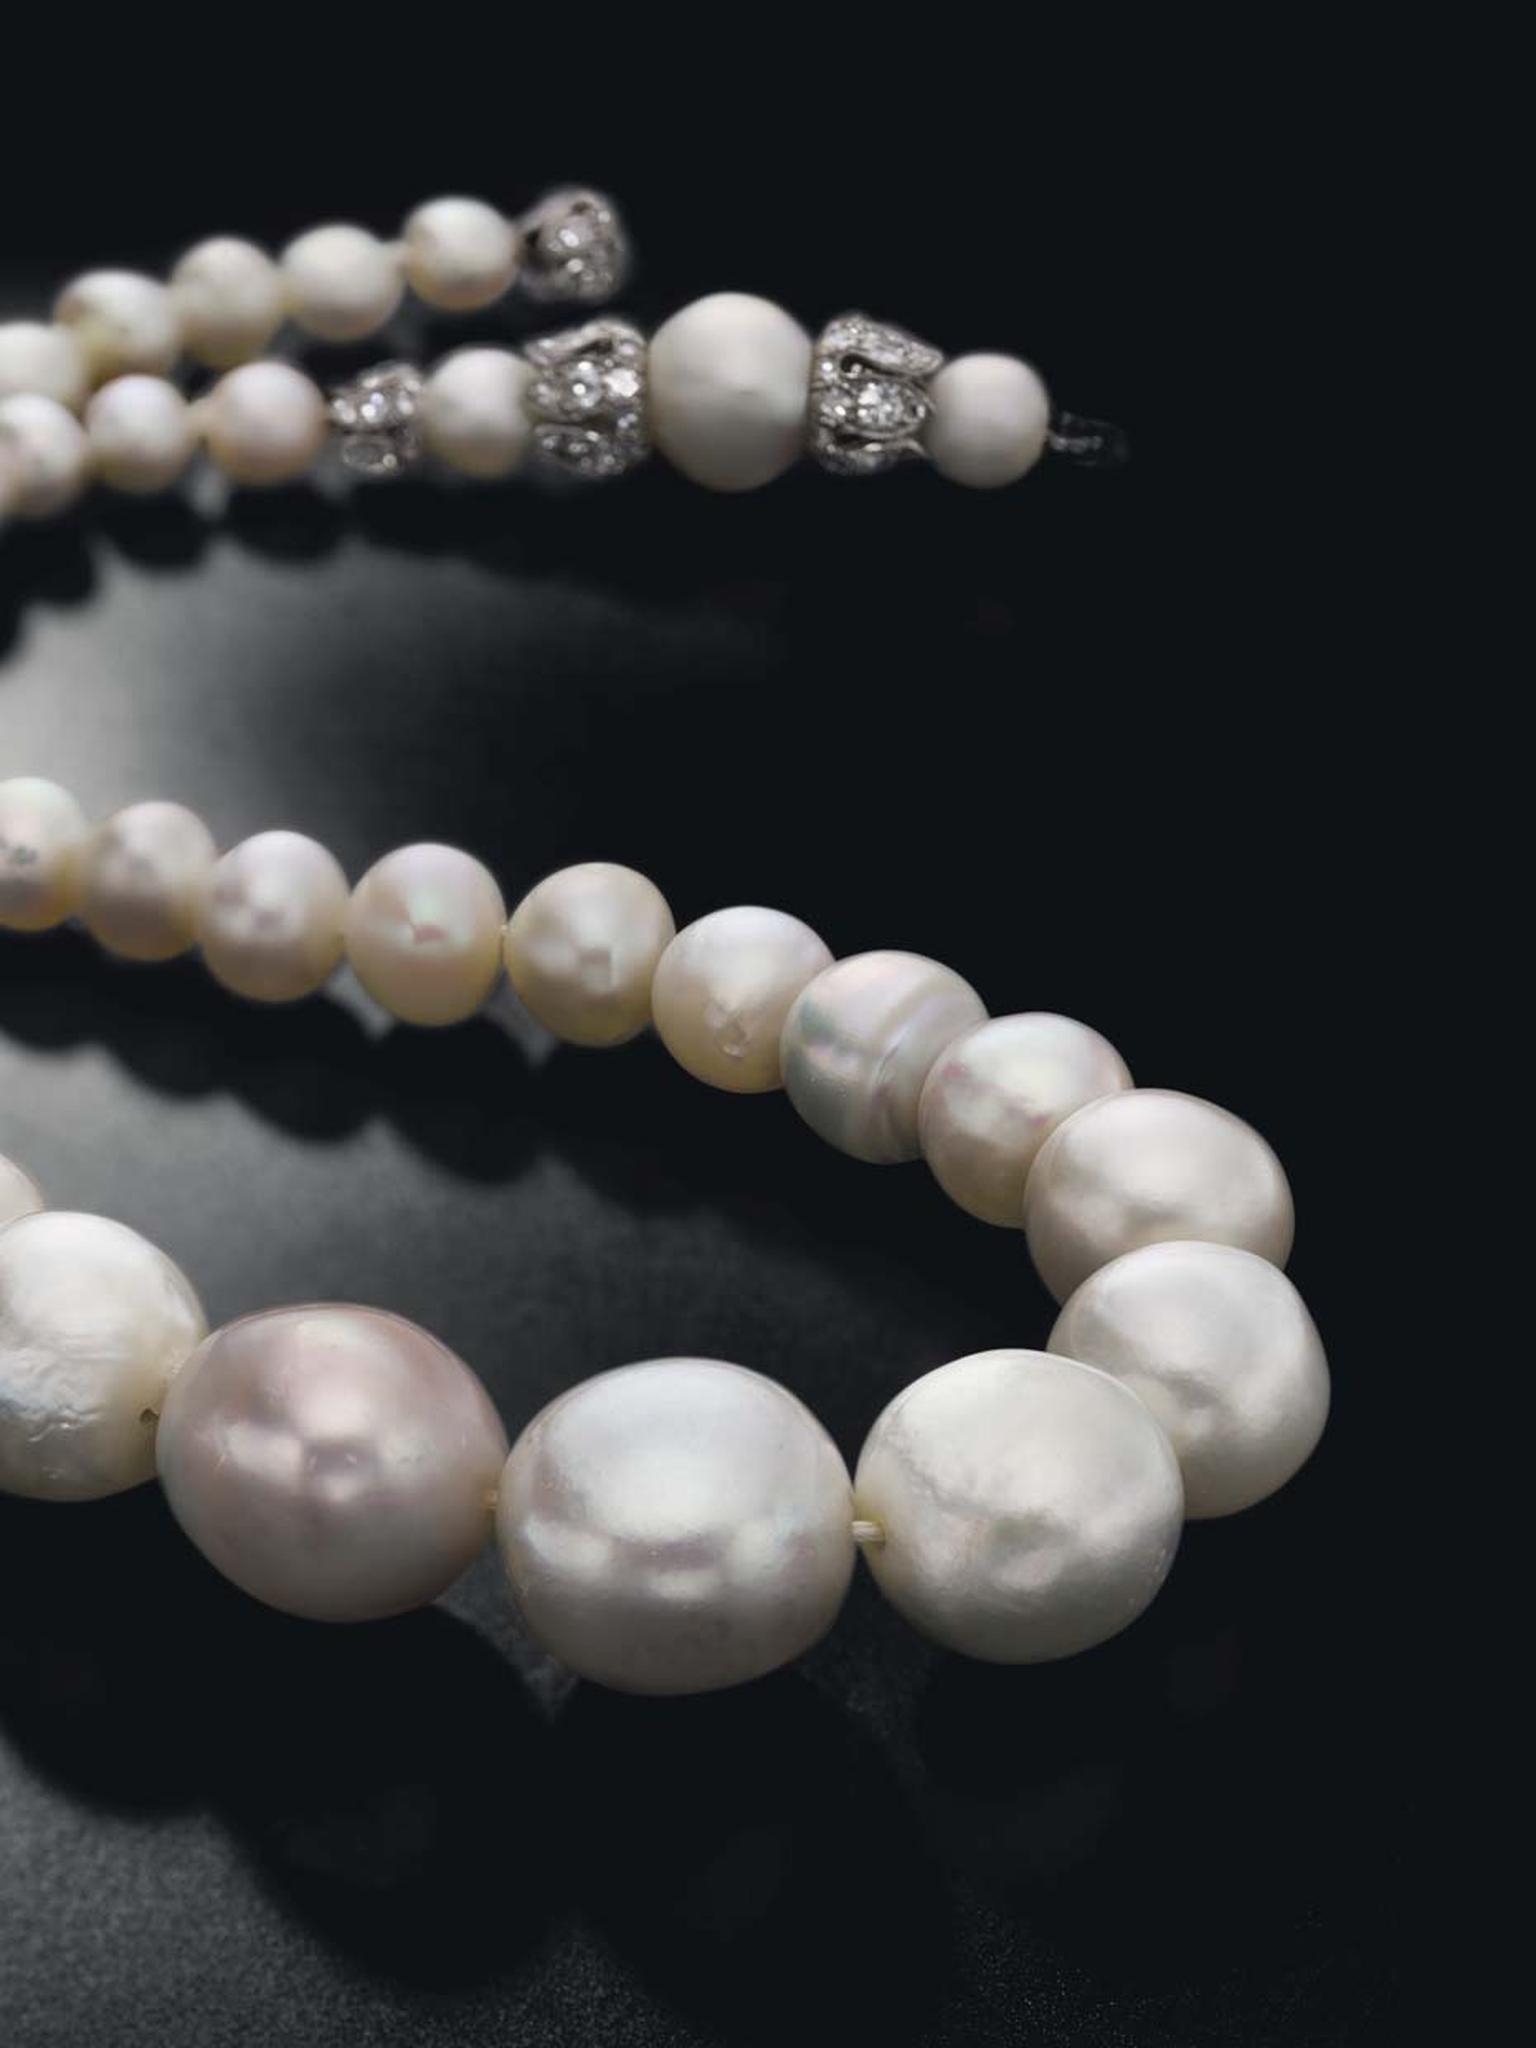 This single-strand, natural saltwater pearl necklace sold for $3.89 million at Christie's Magnificent Jewels auction on 13 May 2015.